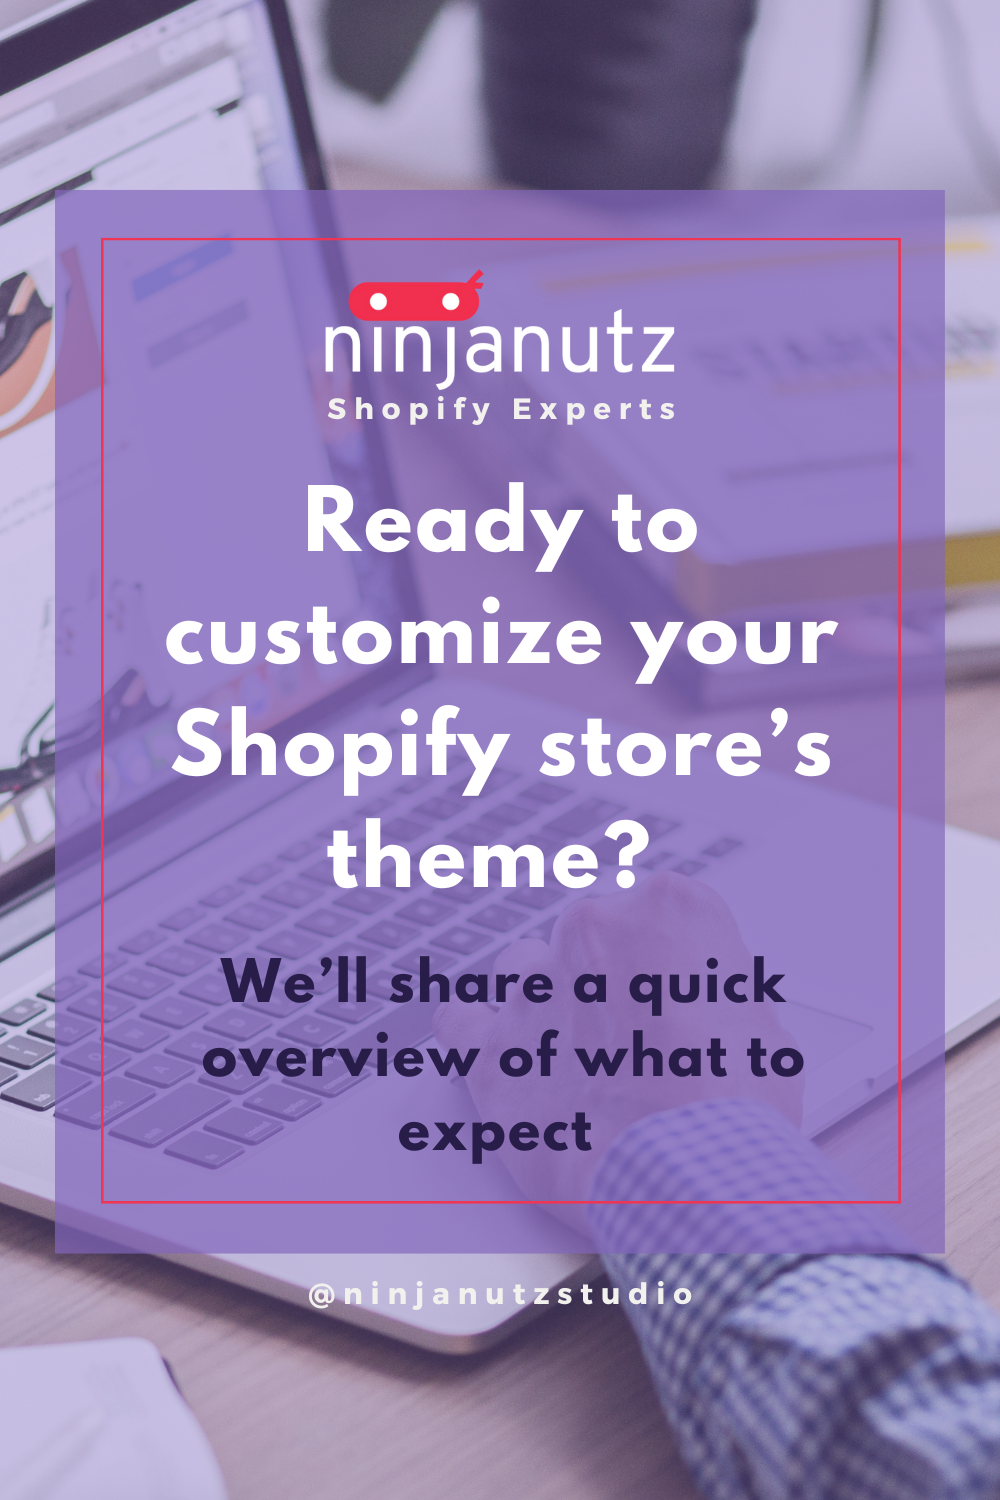 Ready to customize your Shopify store’s theme? We’ll share a quick overview of what to expect NinjaNutz®